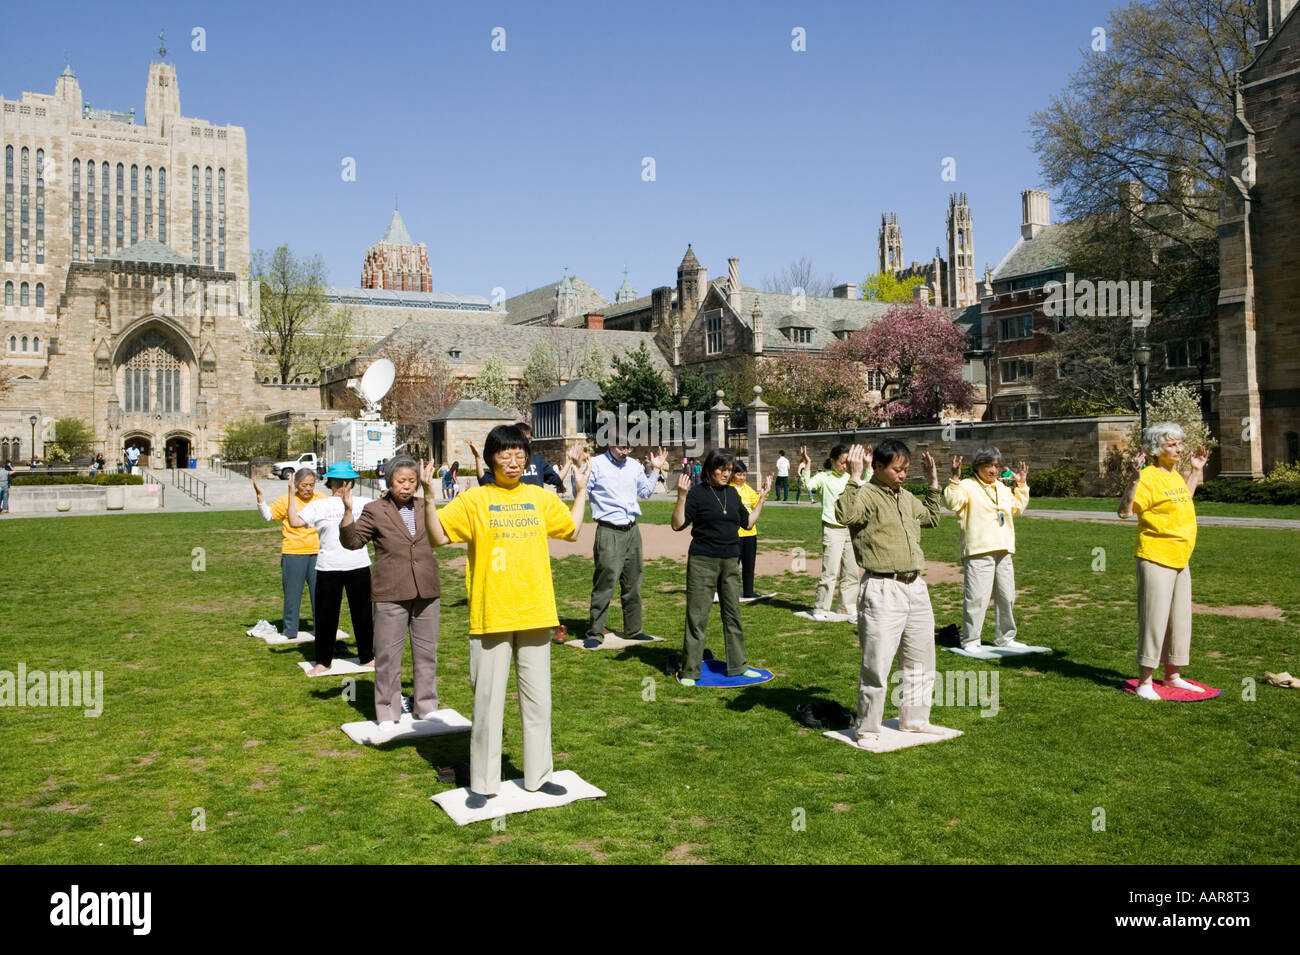 Falun Gong protest 2006 Yale University New Haven Connecticut Stock Photo